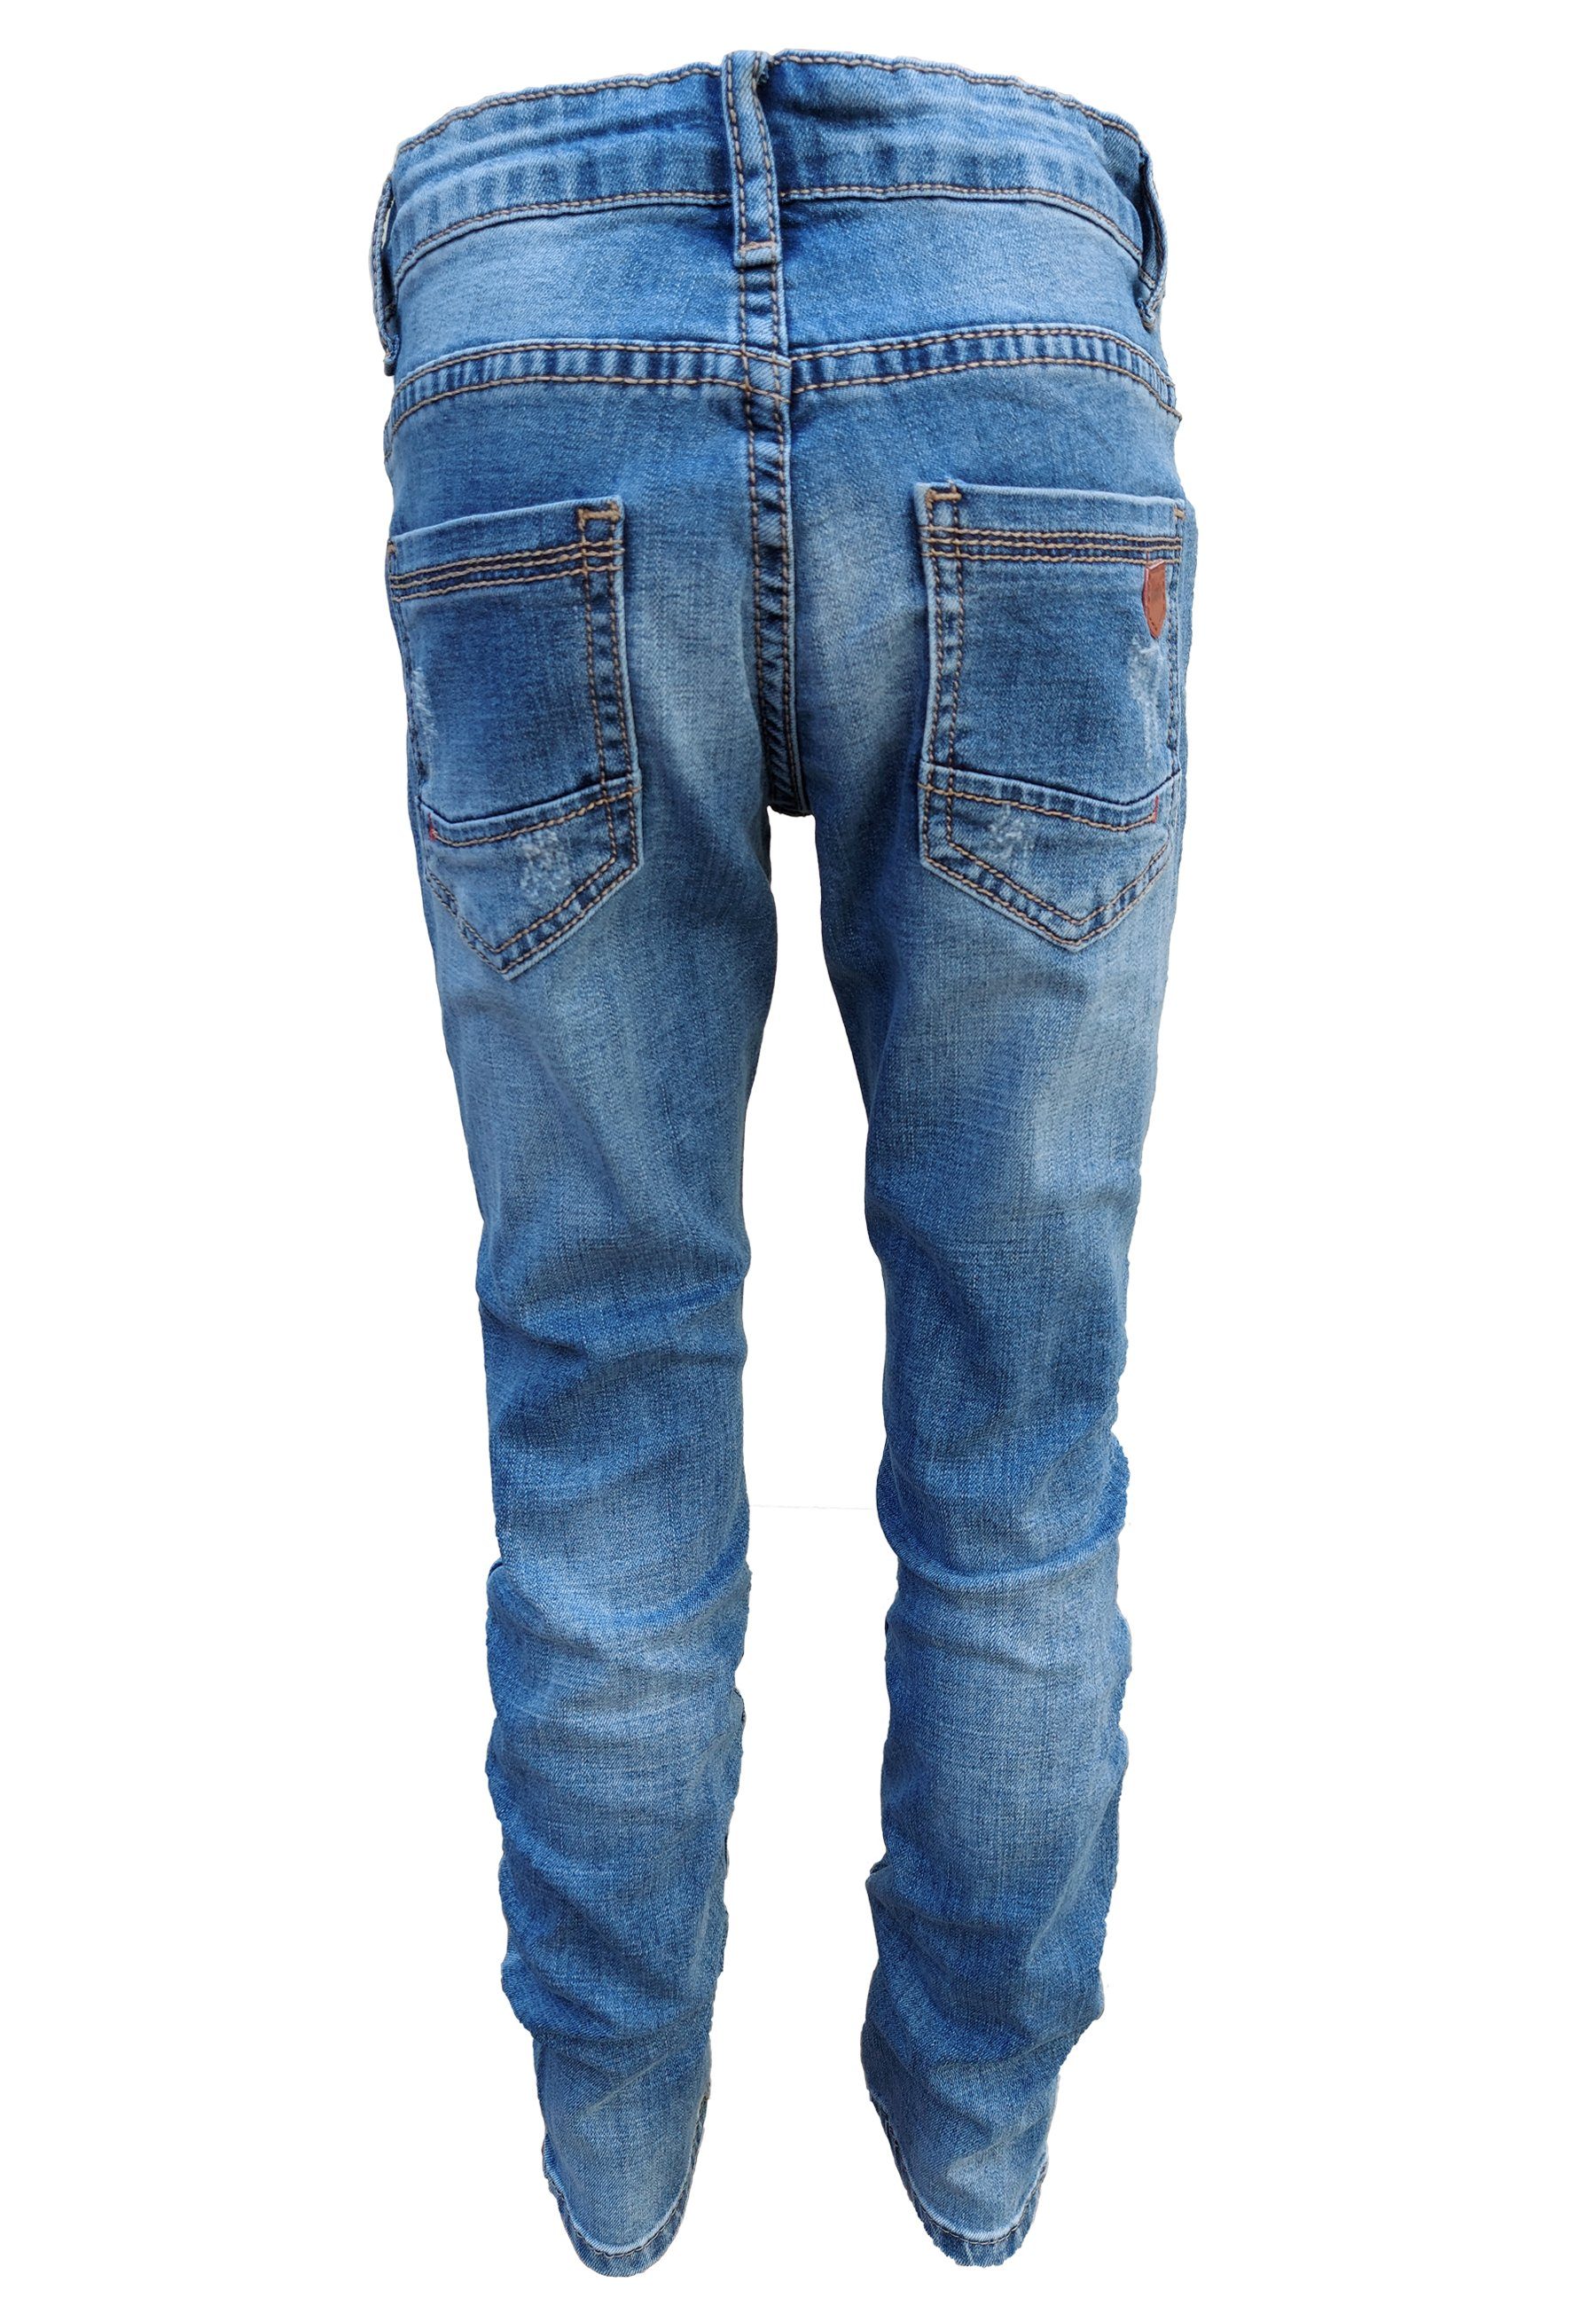 Jeans im Trends Destroyed-Look Bequeme Family